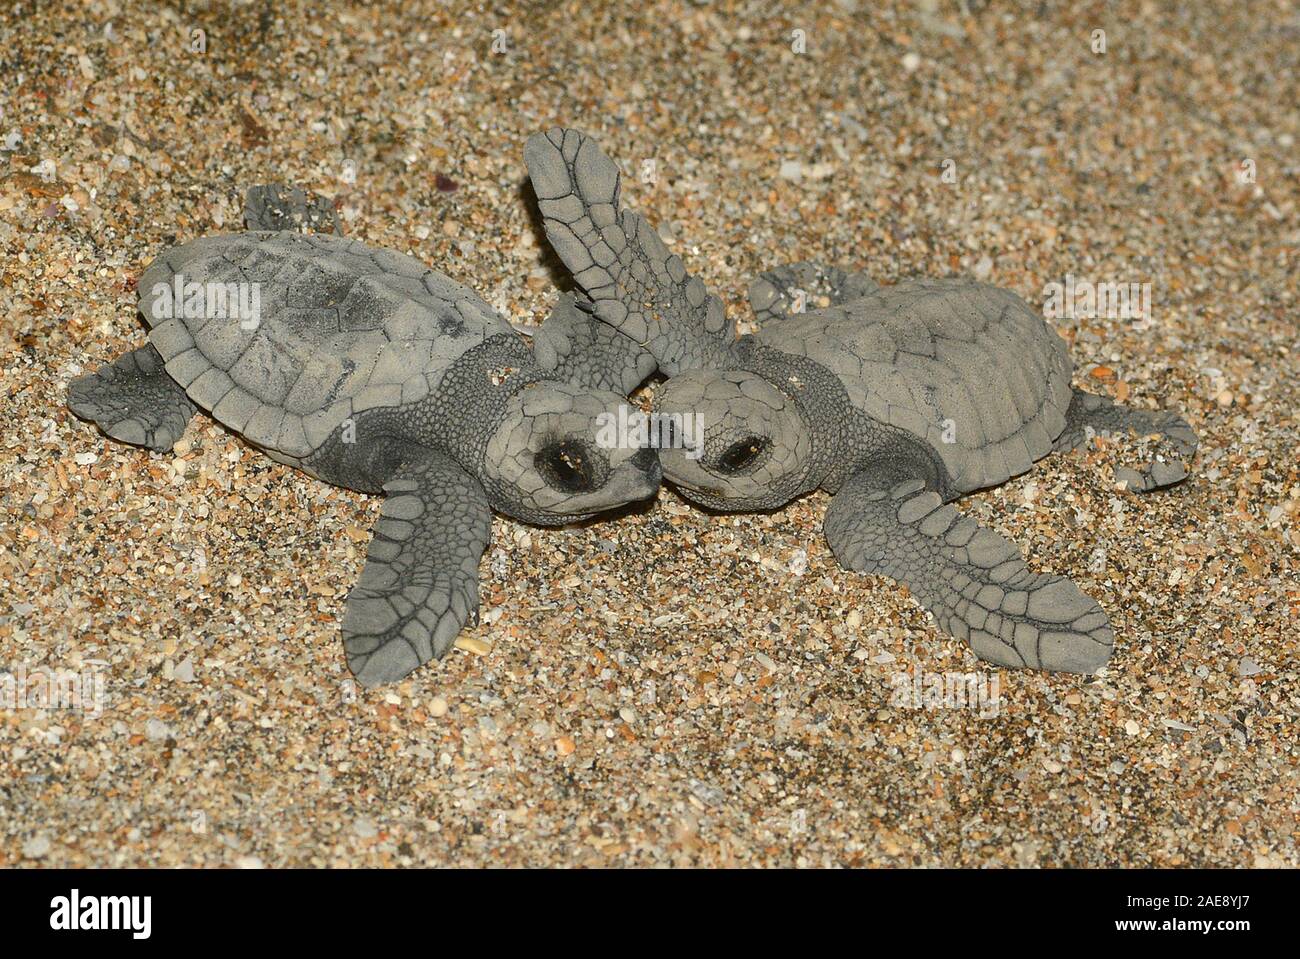 Green sea turtle, Chelonia mydas. Hatchling turtles struggle to reach the relative safety of the ocean,  Bali, Indonesia. Stock Photo